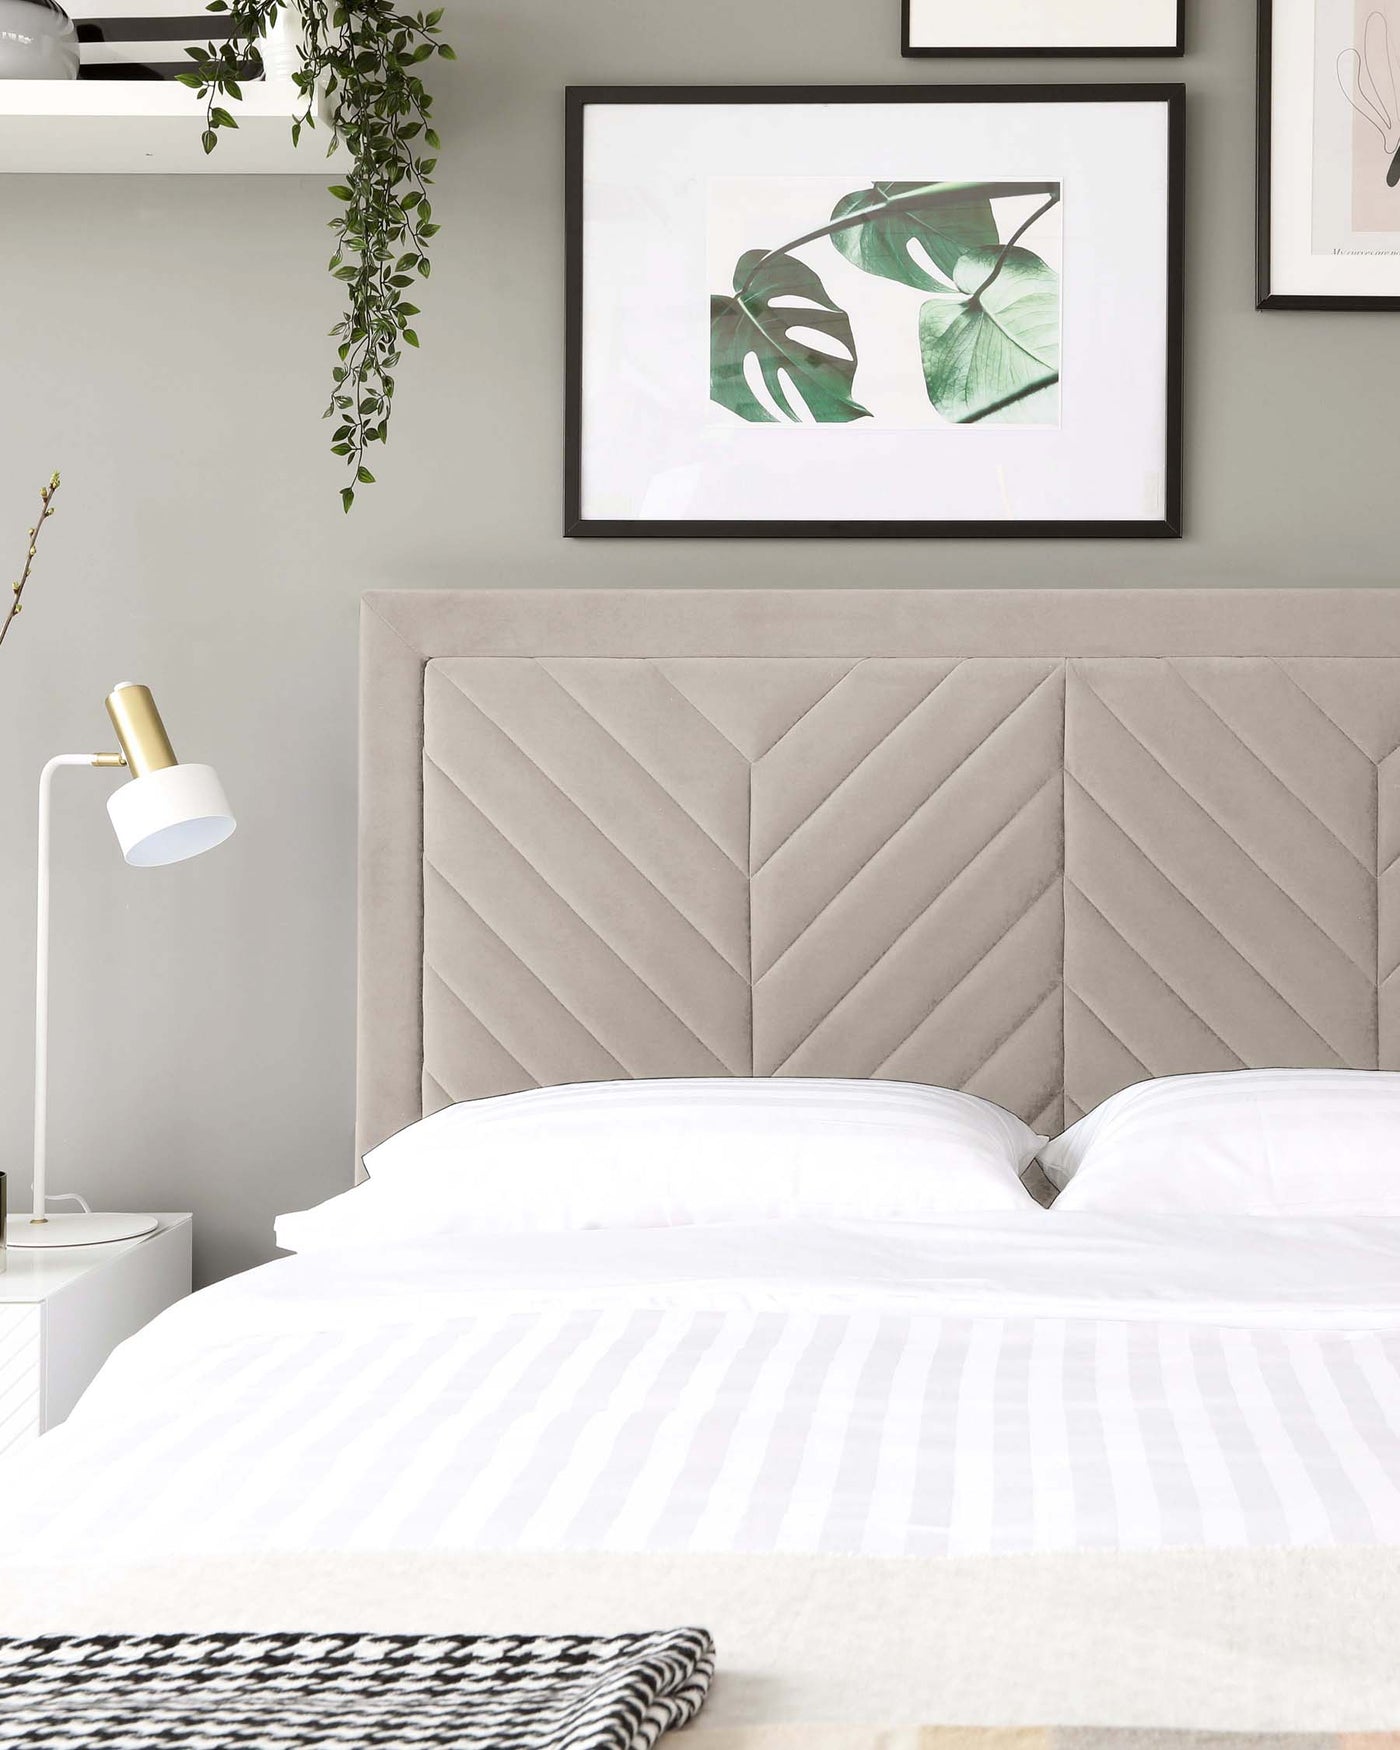 Elegant taupe upholstered bed with a herringbone-patterned headboard, white bedding, and a minimalist white bedside table with a modern white and gold lamp.